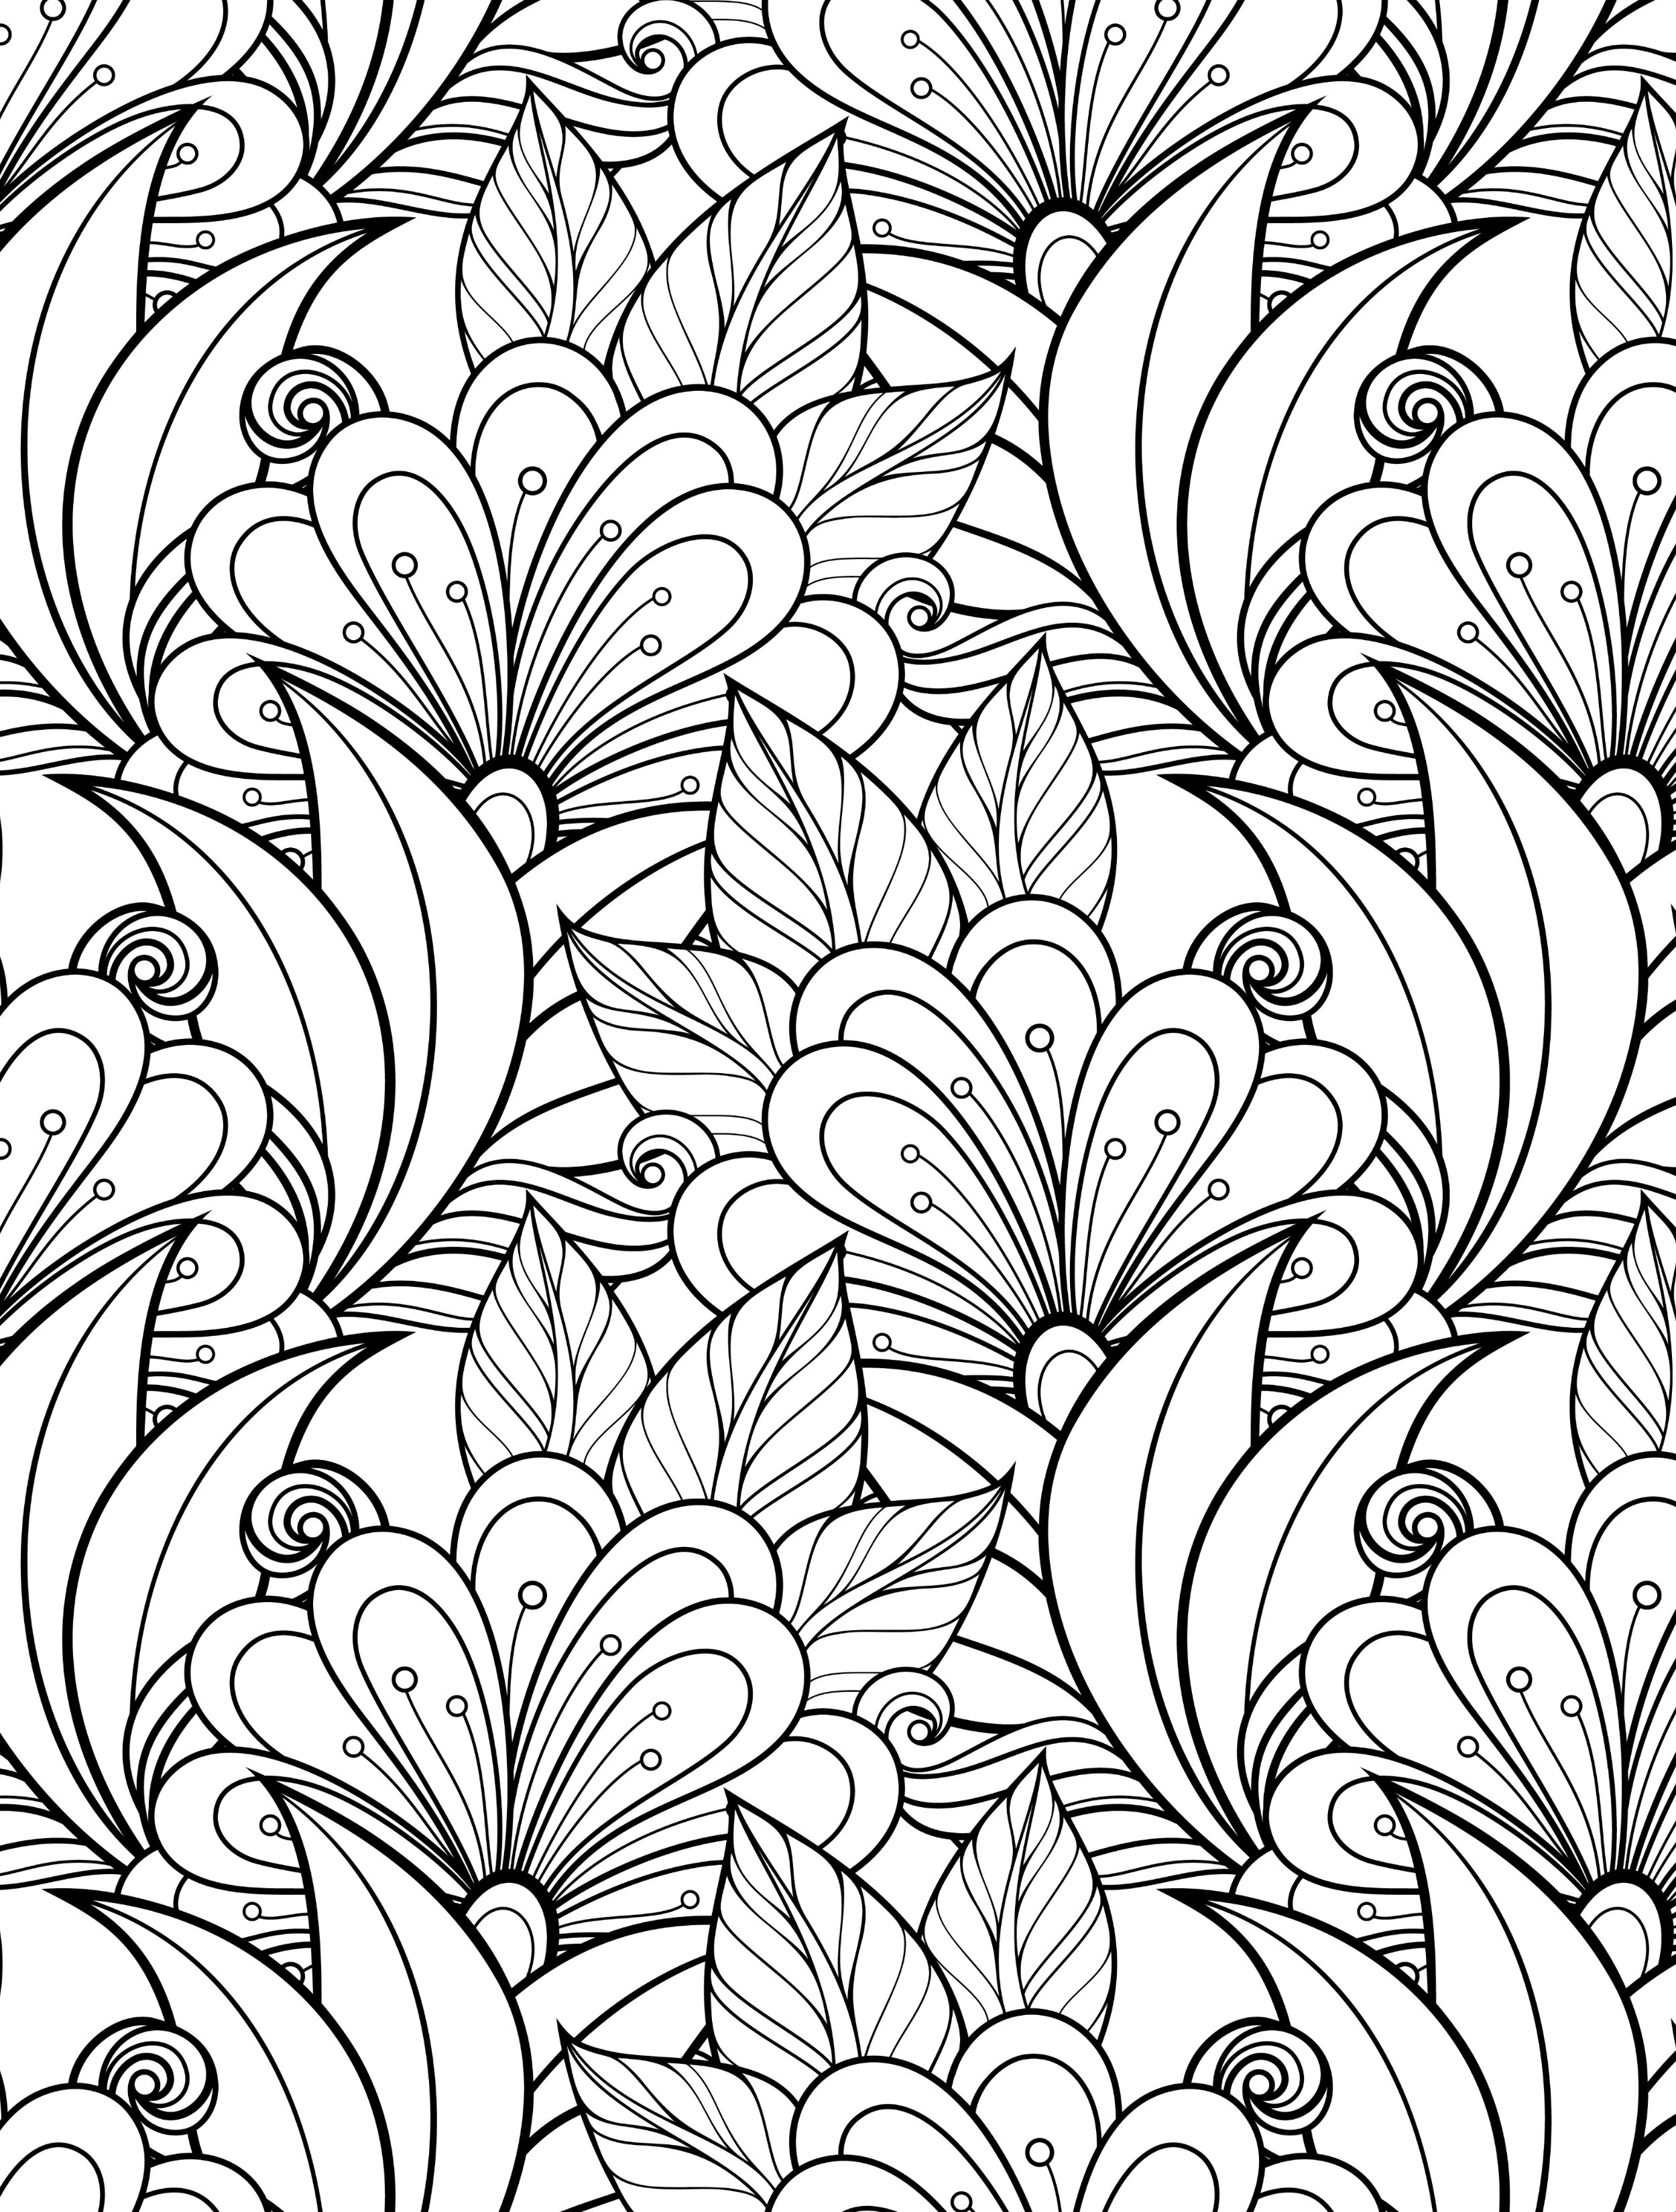 Adult Coloring Book Images
 24 More Free Printable Adult Coloring Pages Page 7 of 25